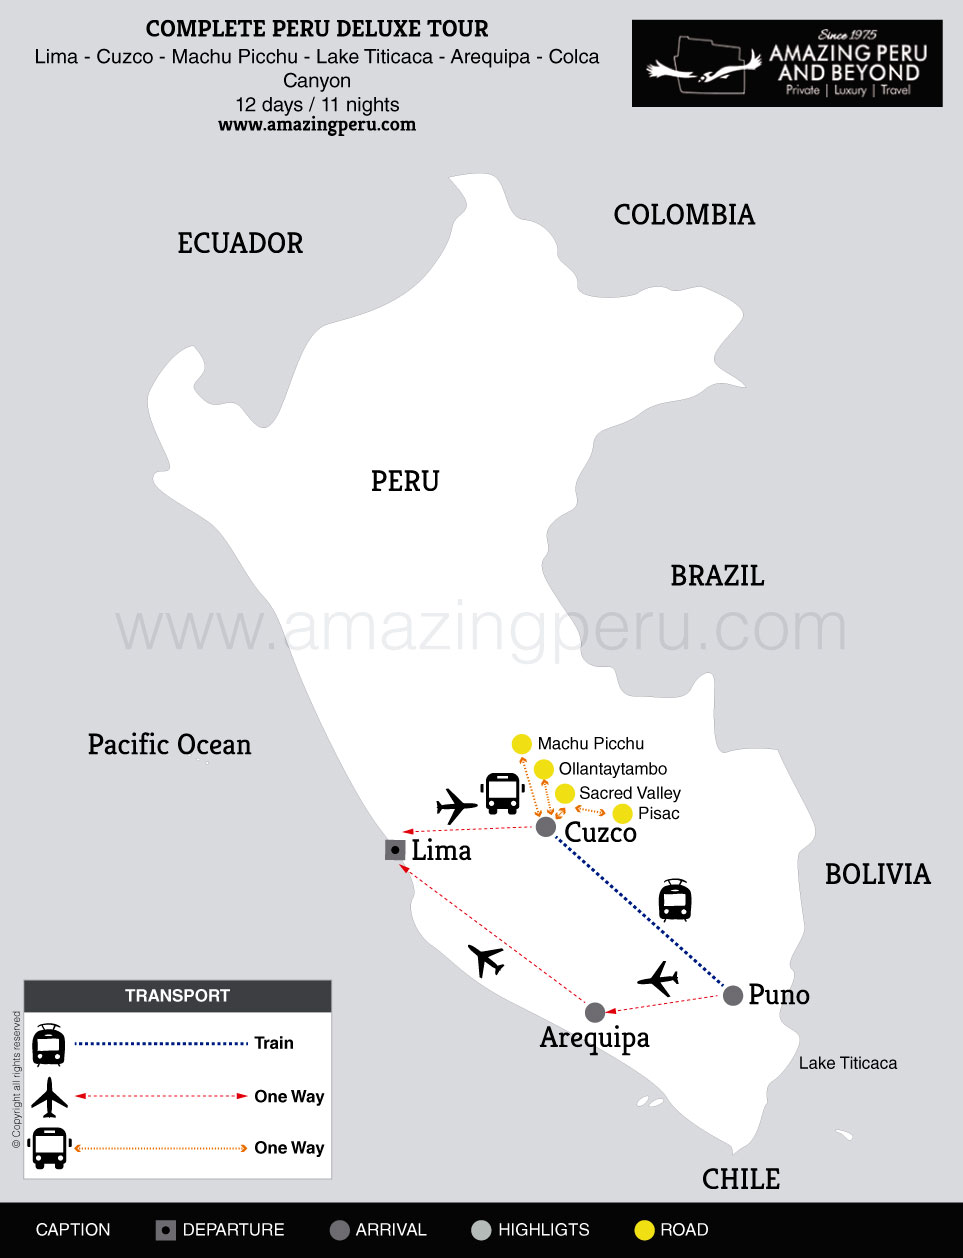 2022 Complete Peru Deluxe Tour - 12 days / 11 nights.